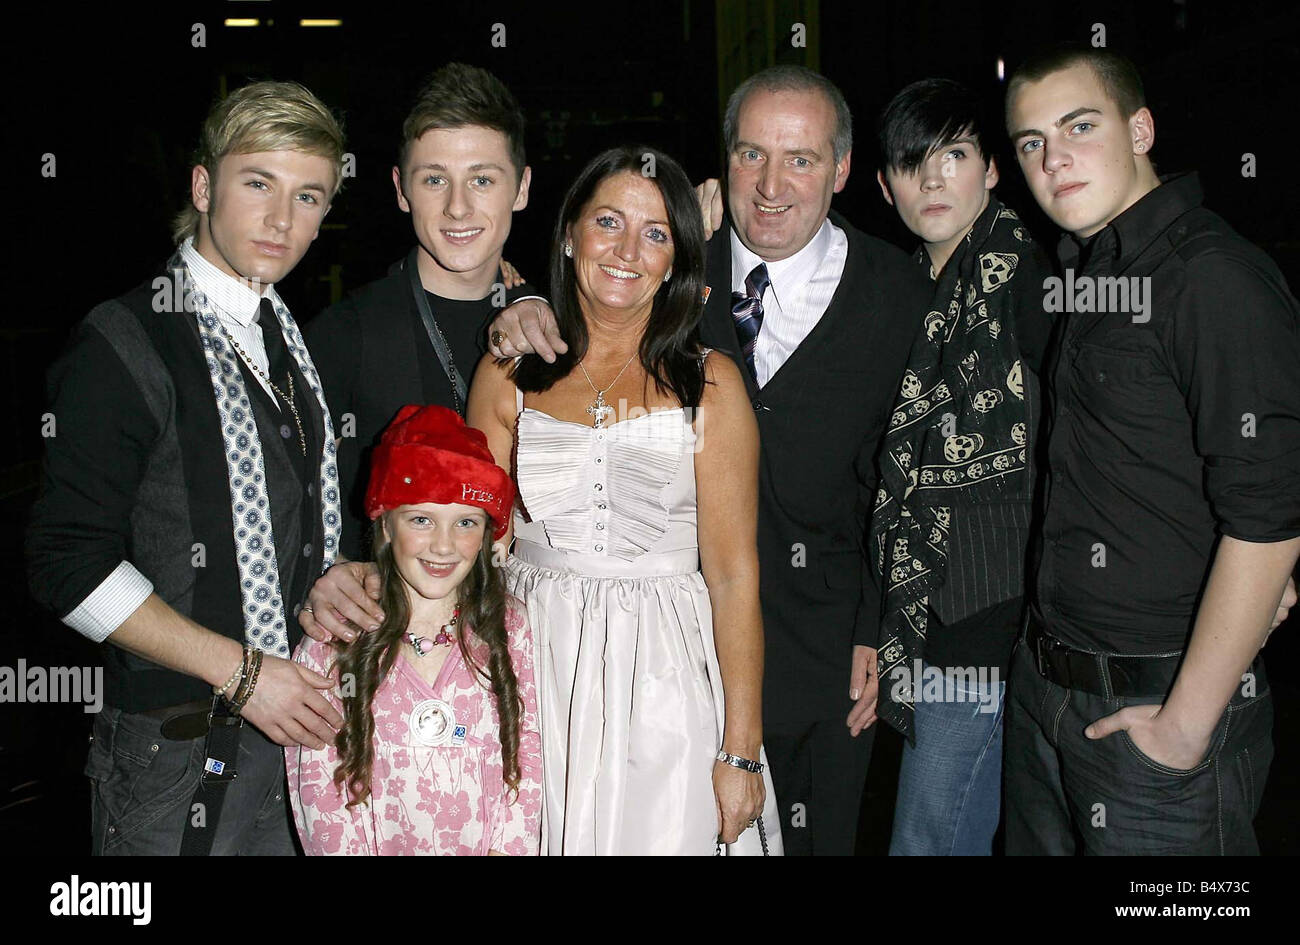 Parents of Michael Shields Michael snr and Marie with their grand daughter Kelsea meet the band Eaton Road before benefit gig in Liverpool December 4th 2006 Stock Photo